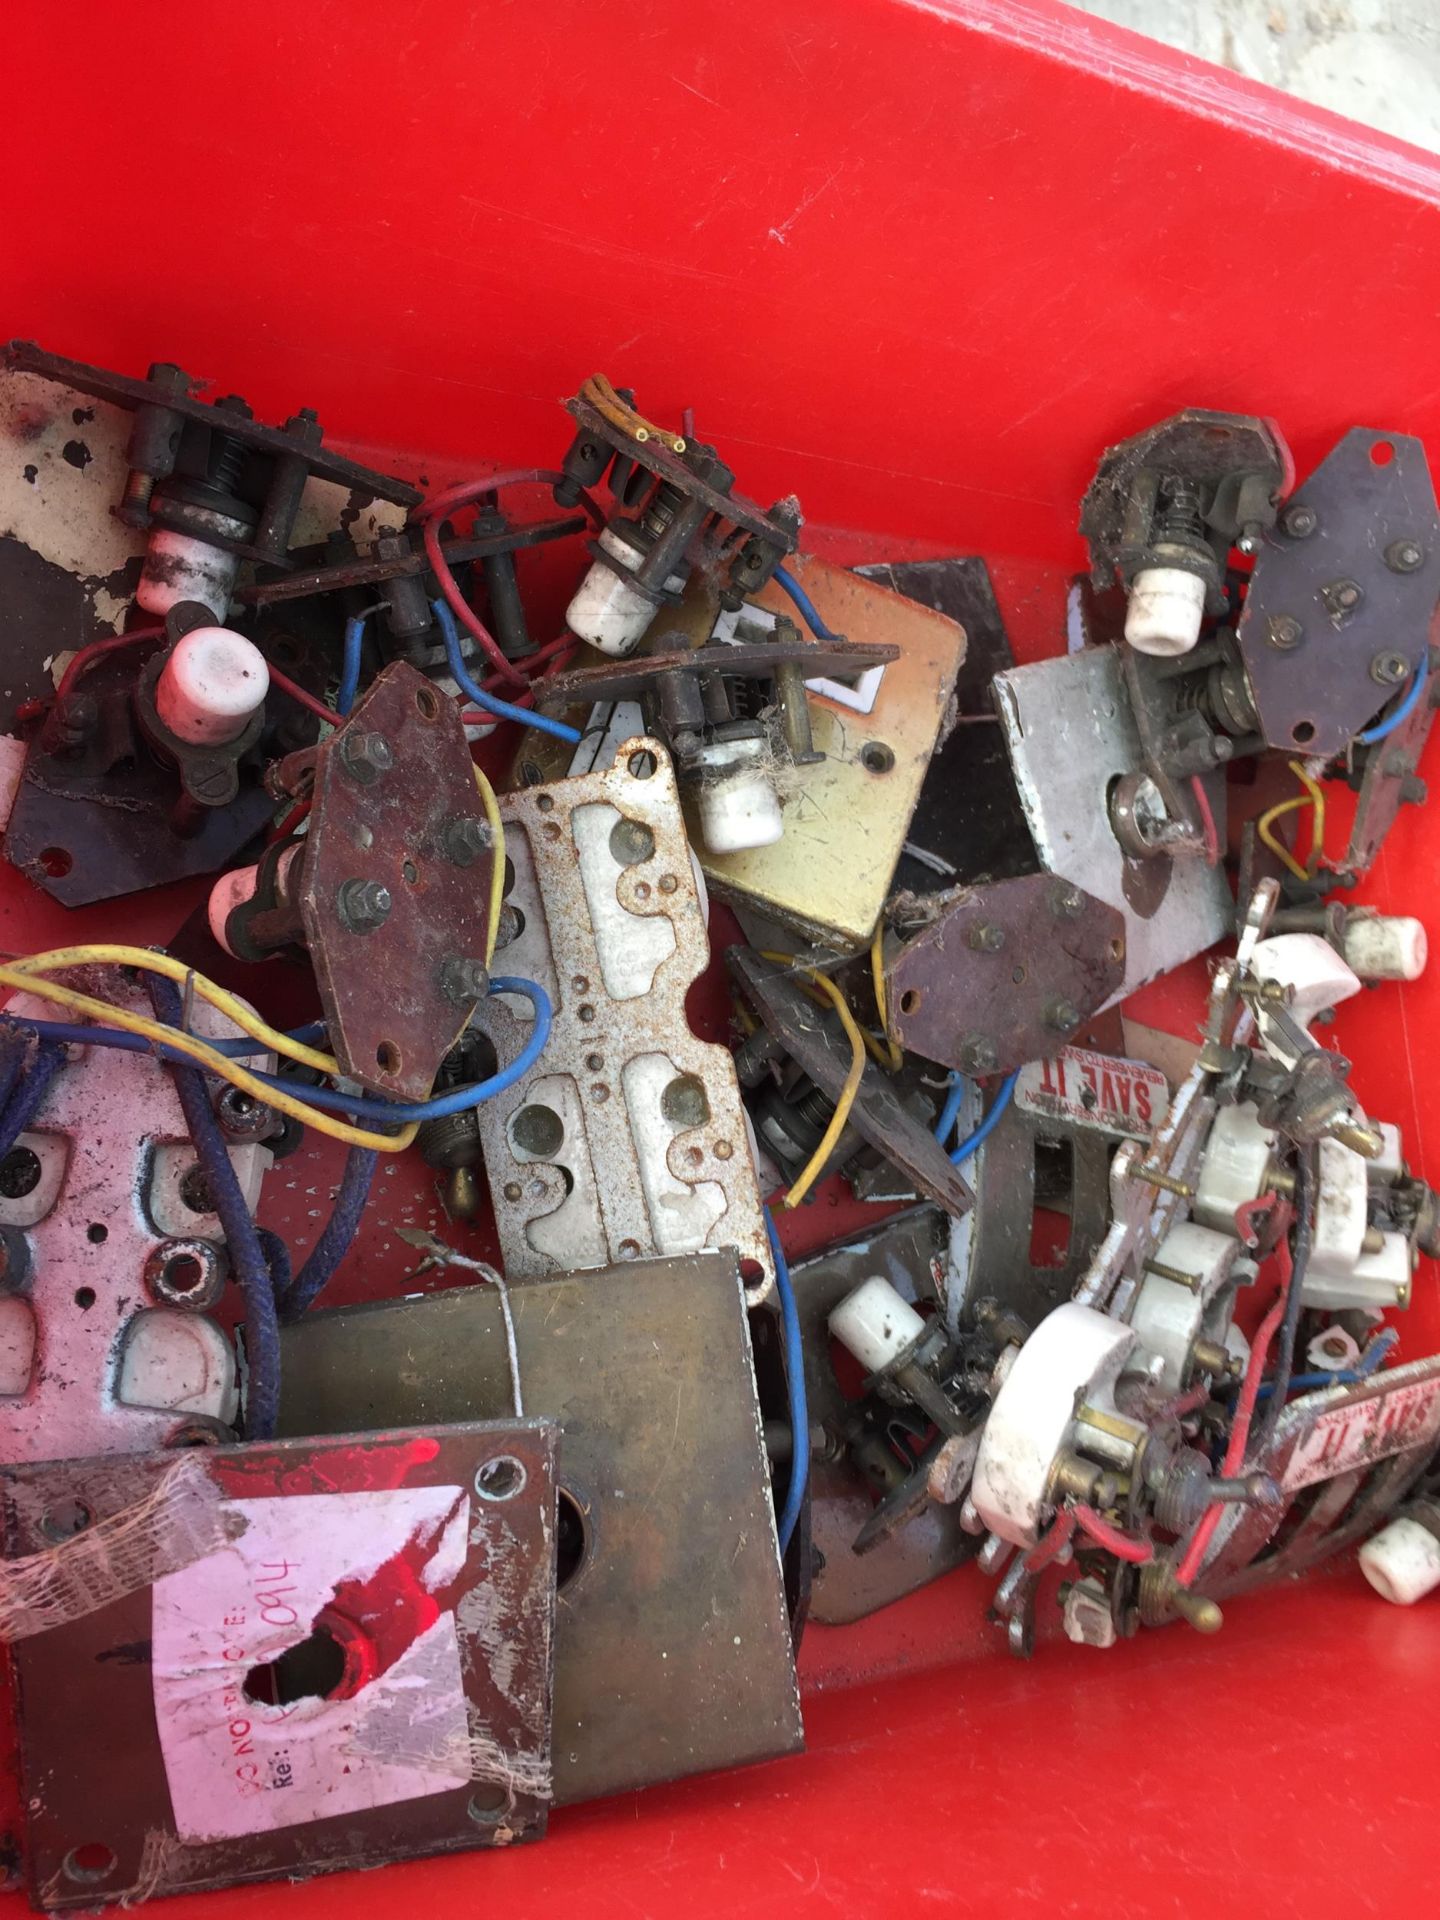 A LARGE ASSORTMENT OF VINTAGE LIGHT SWITCHES AND ELEVATOR BUTTONS ETC - Image 3 of 3